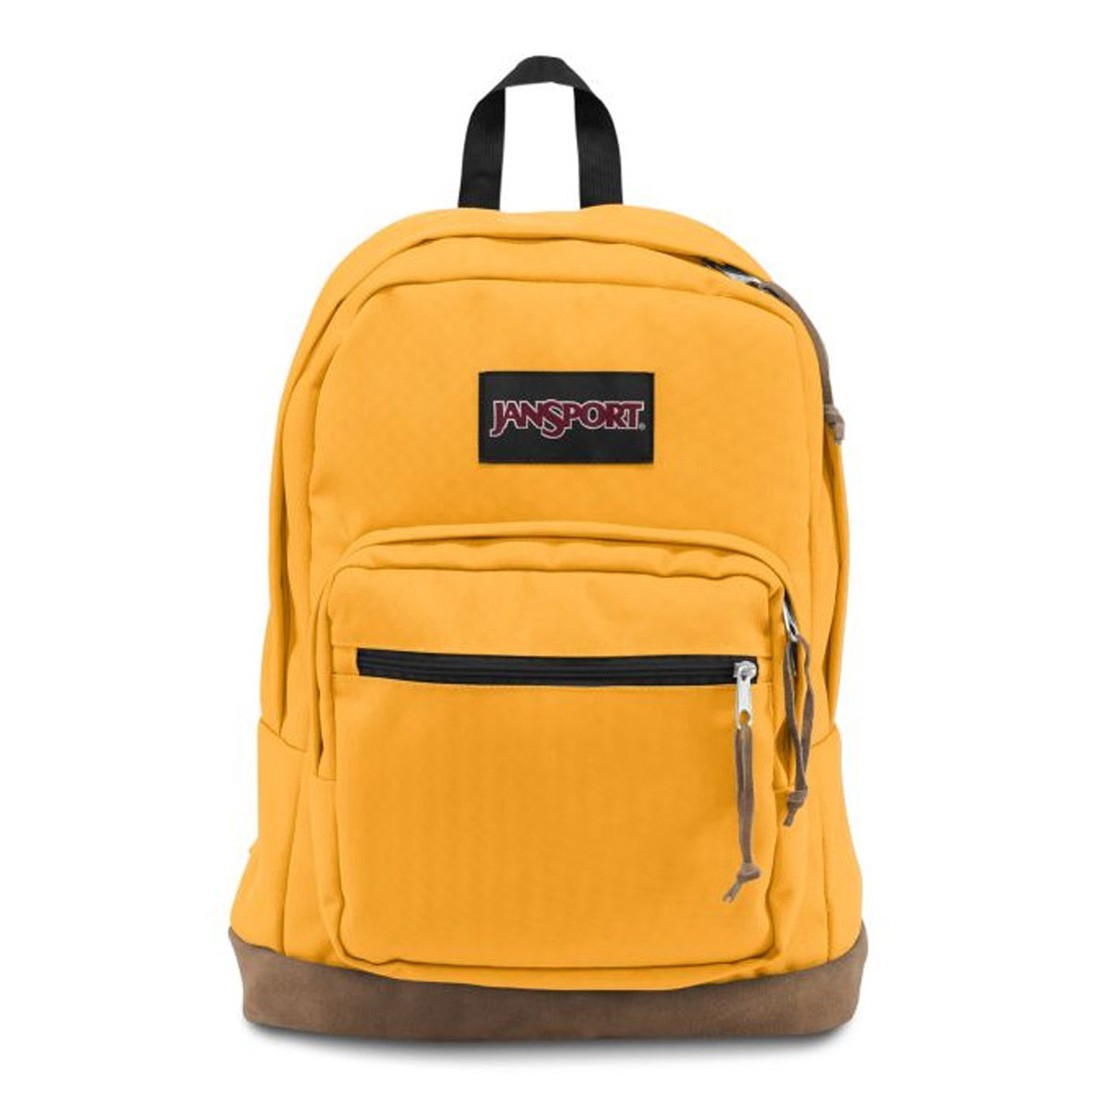 jansport right pack yellow